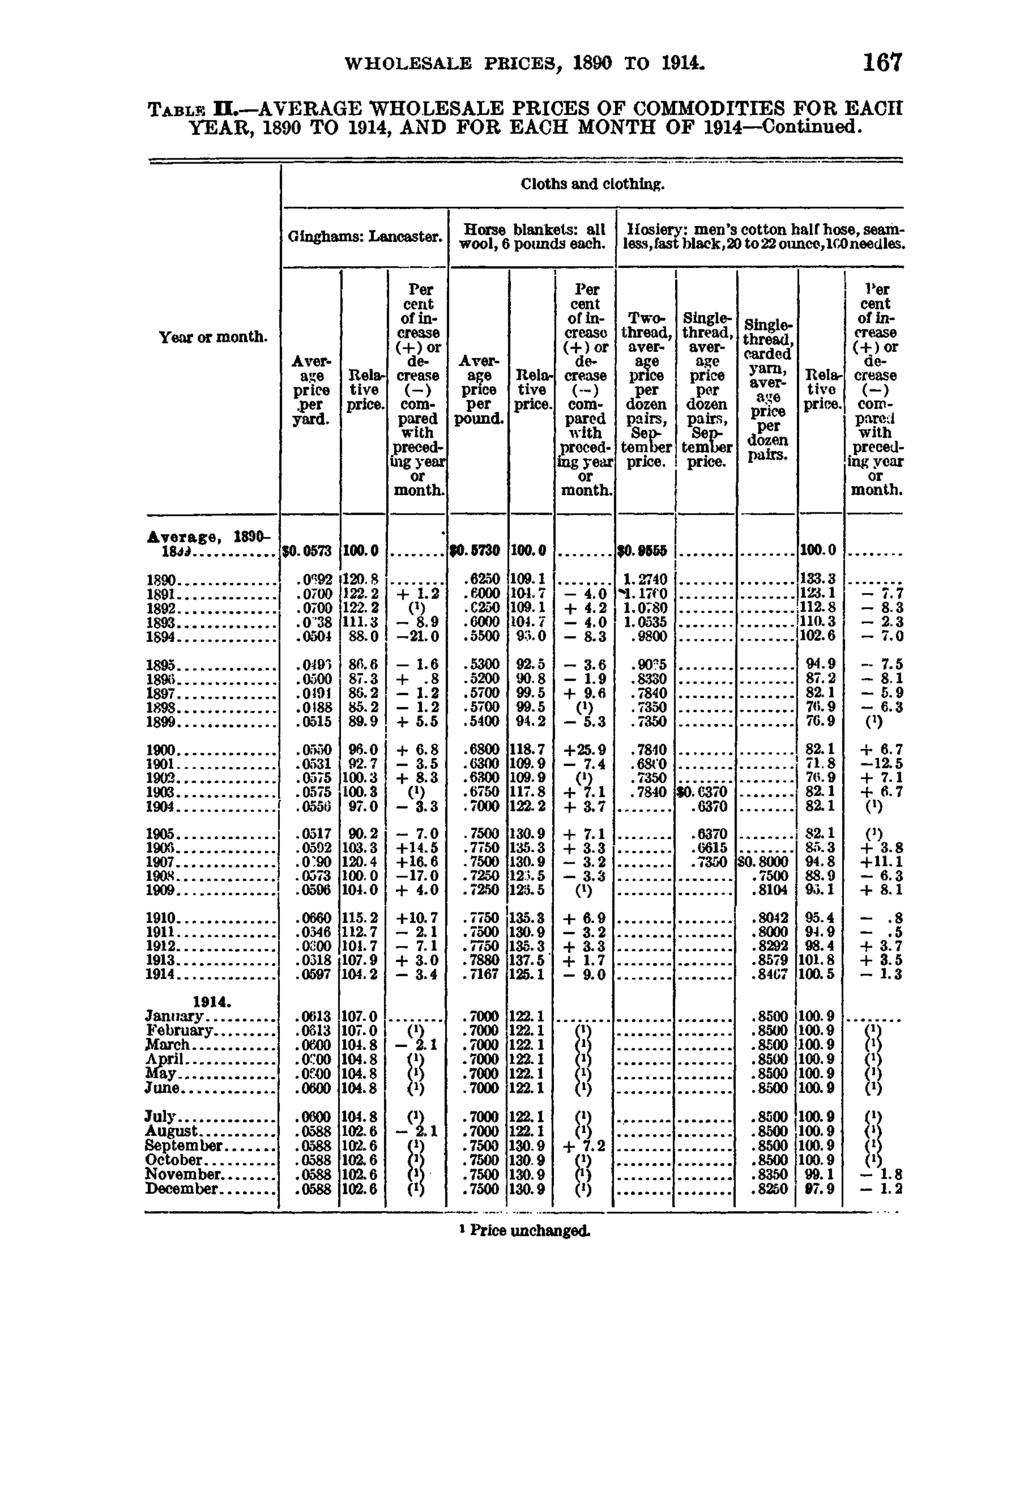 WHOLESALE PRICES, 1890 TO 167 T a b lk EL AVERAGE WHOLESALE PRICES OF COMMODITIES FOR EACH YEAR, 1890 TO 1914, AND FOR EACH MONTH OF 1914 Continued. Cloths and clothing. Ginghams: Lancaster.